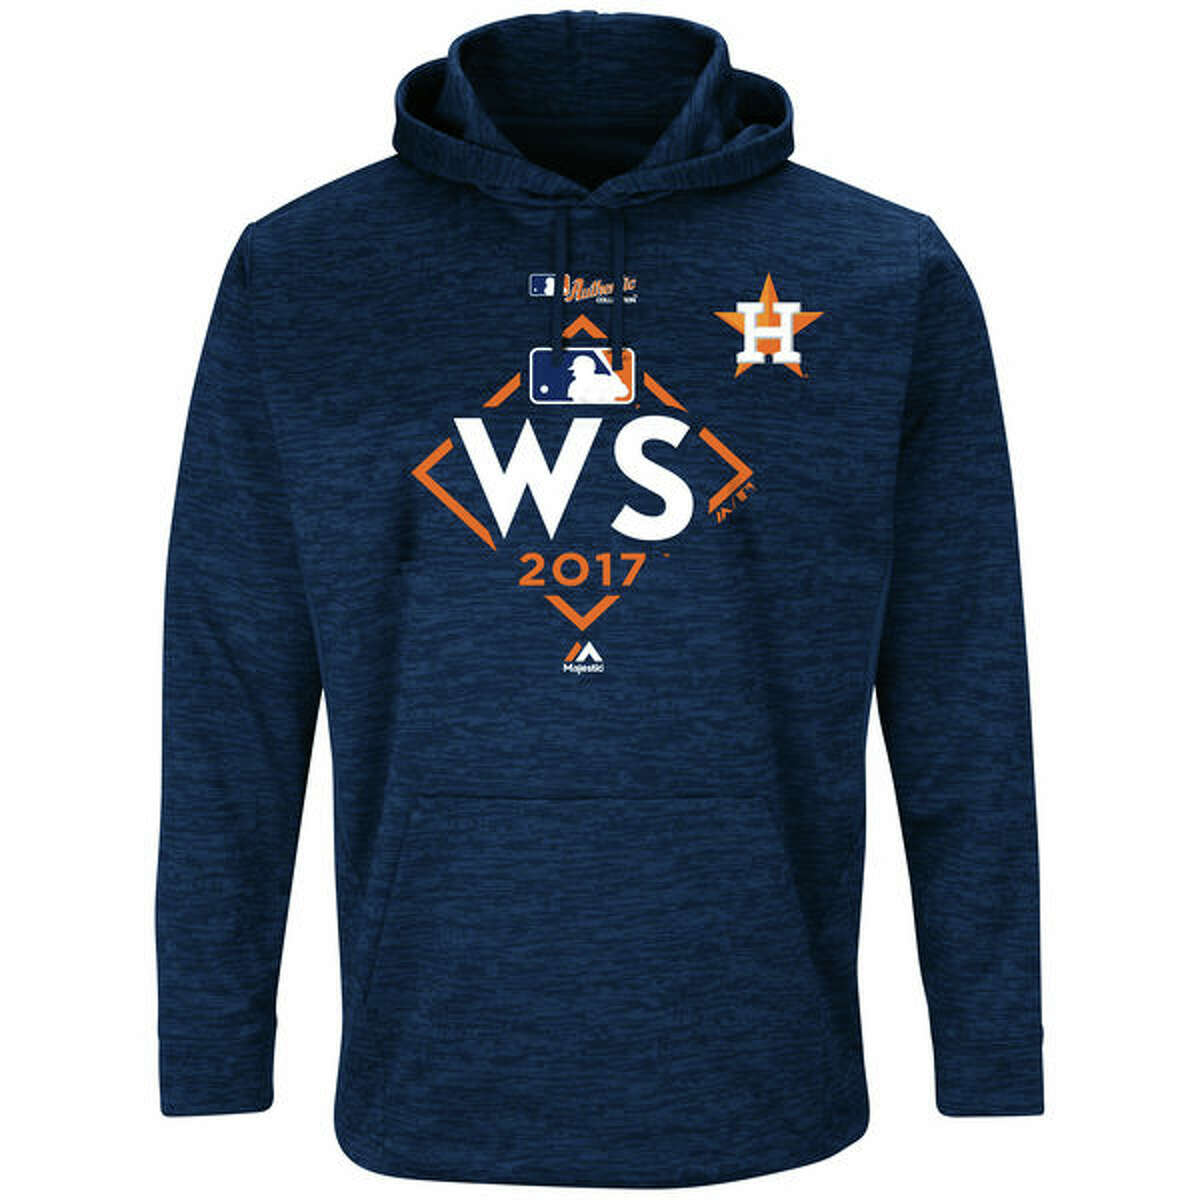 Here's what Astros' World Series merchandise looks like